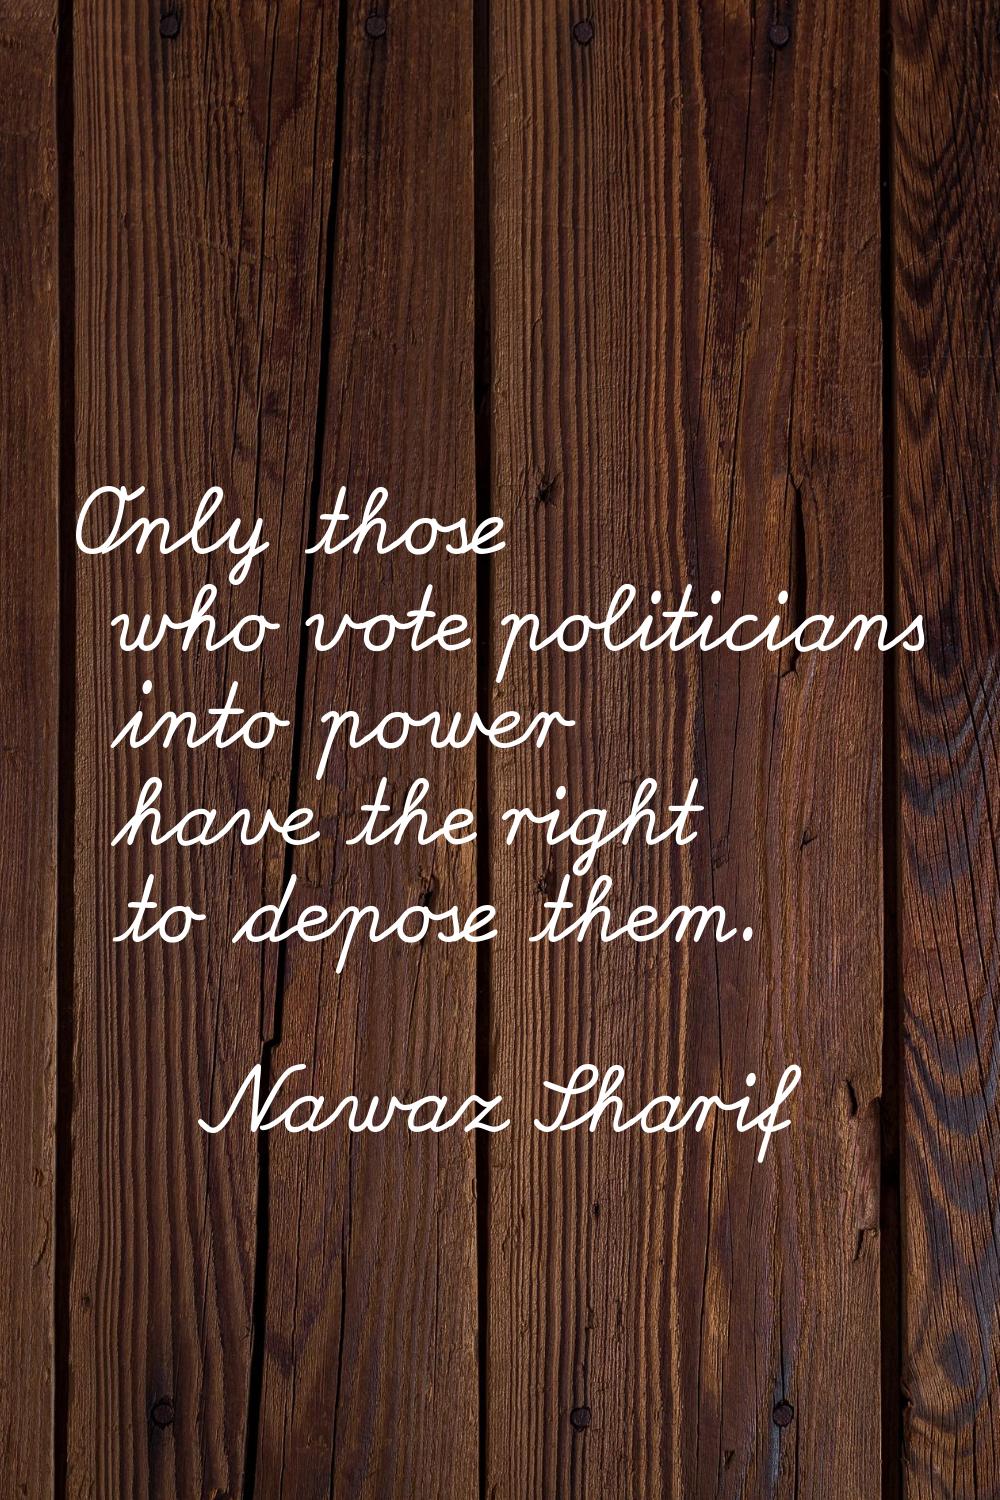 Only those who vote politicians into power have the right to depose them.